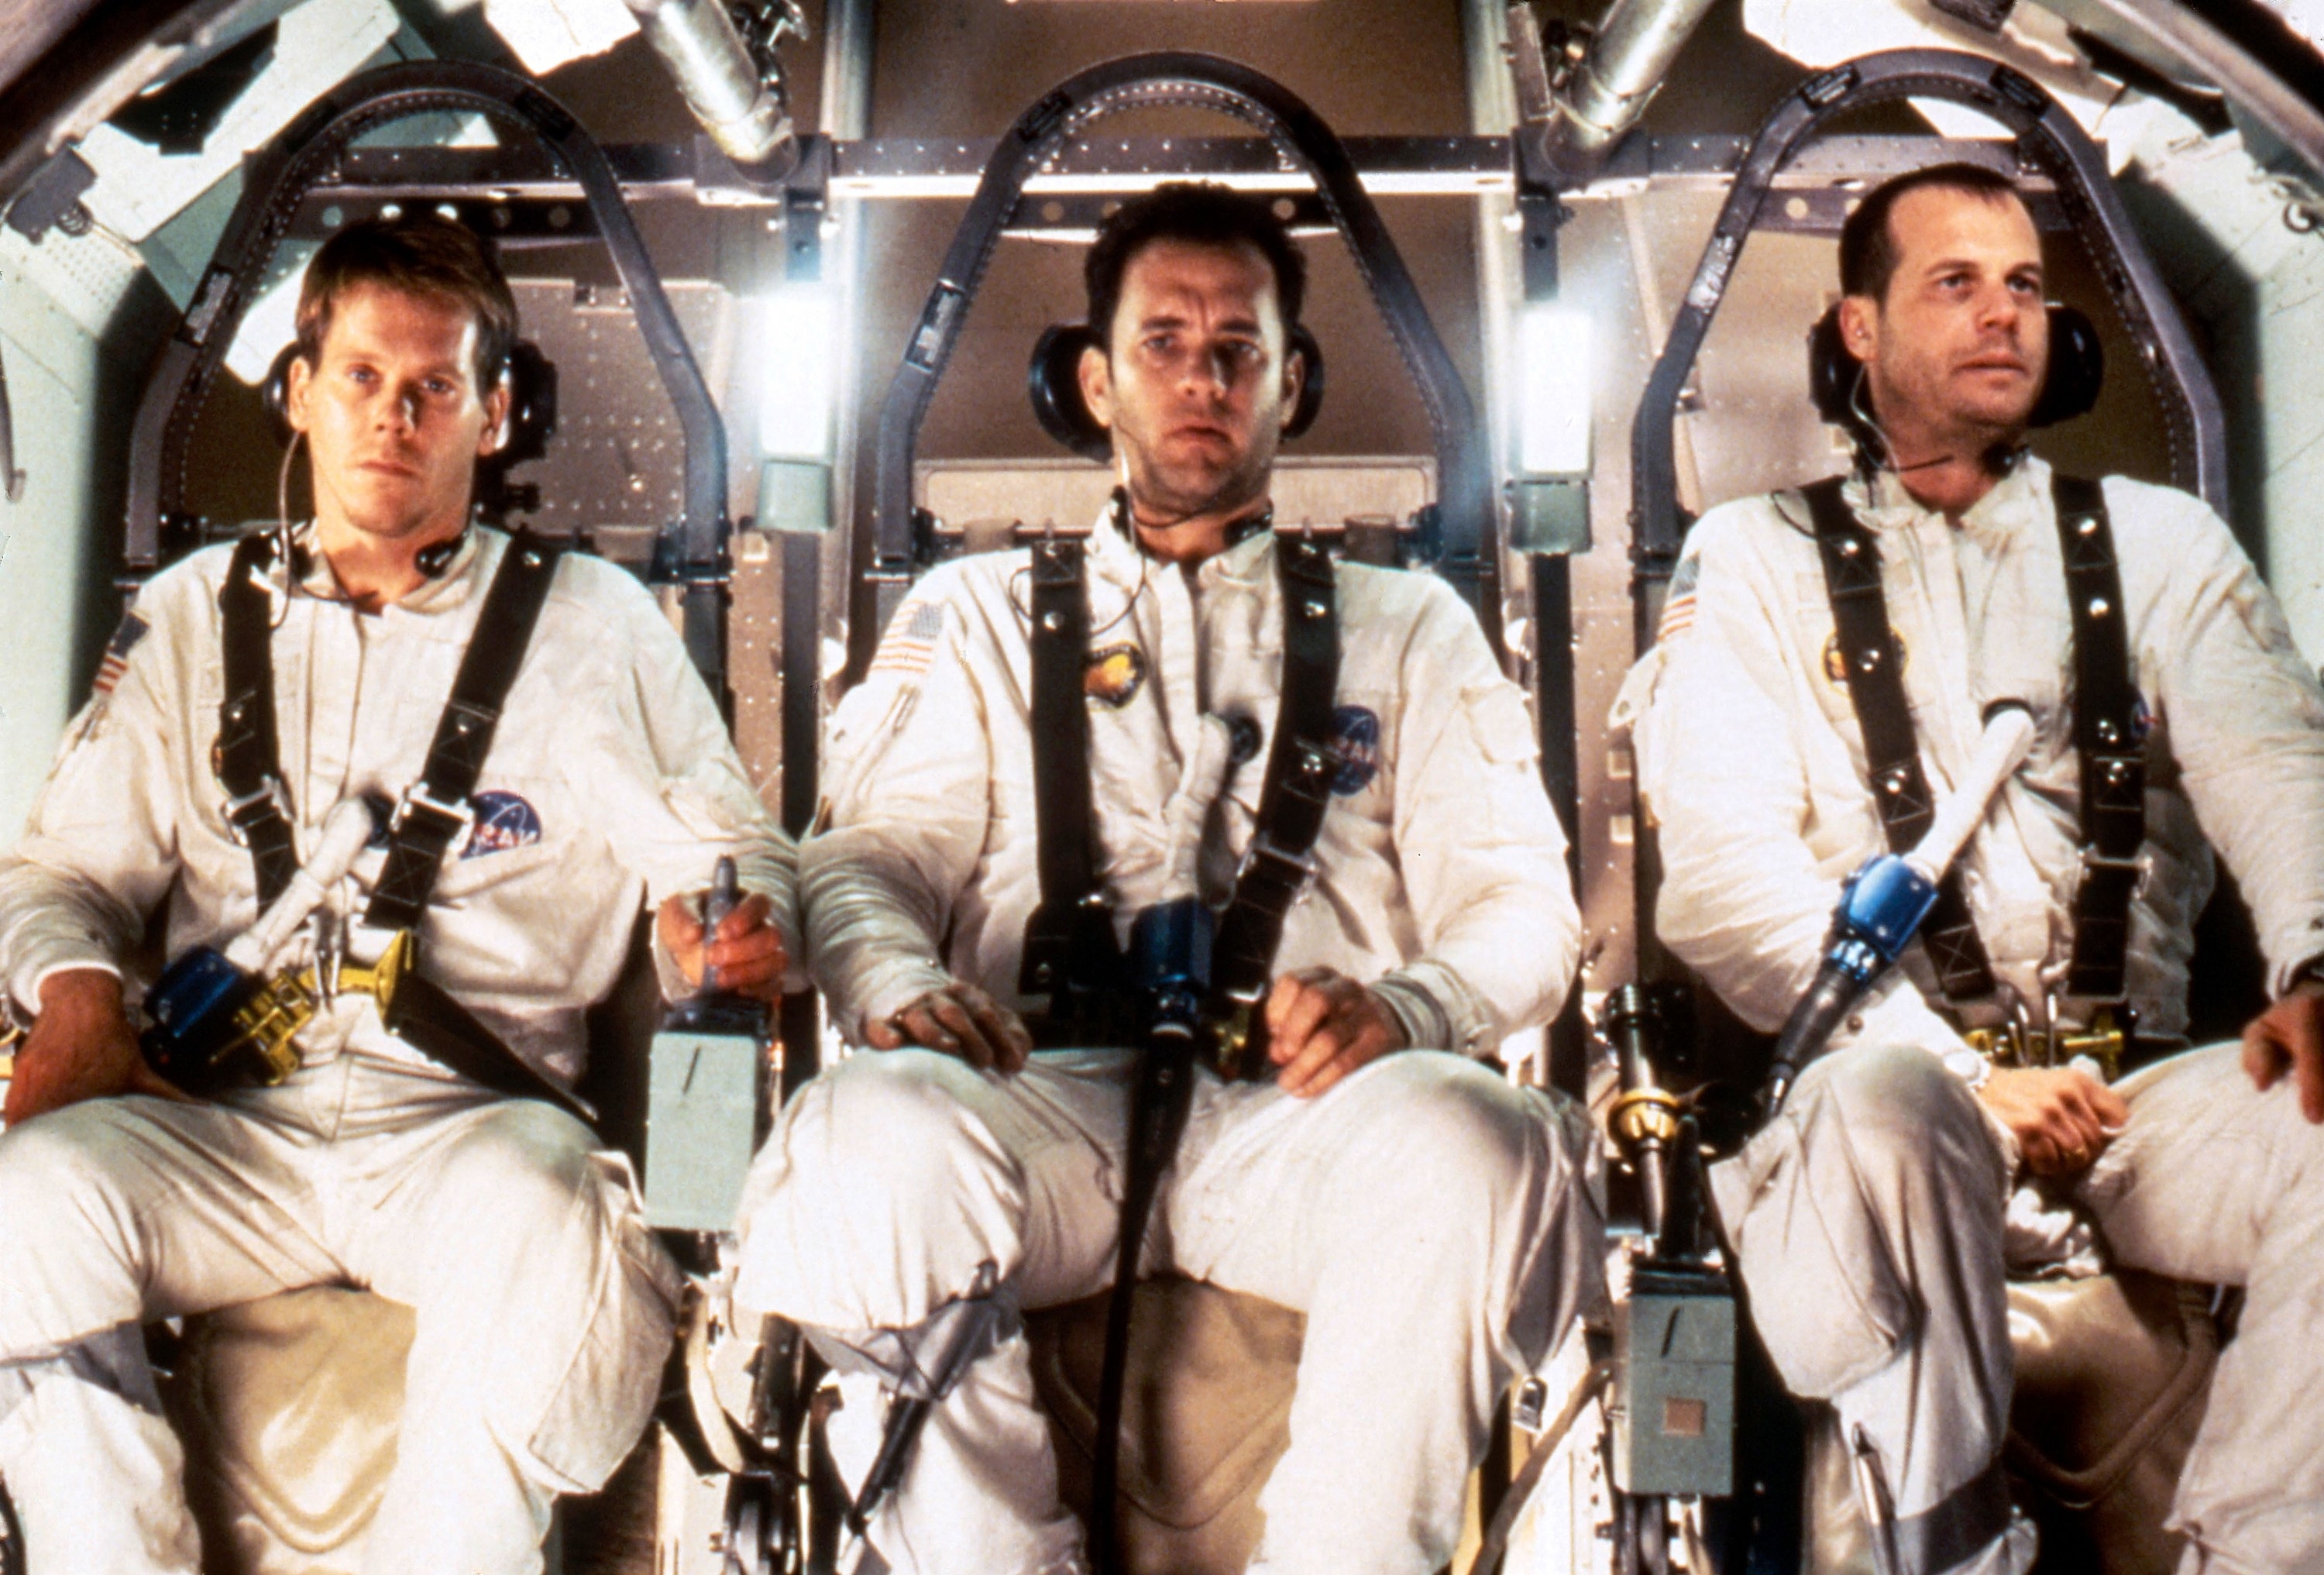 Fred Haise, Jack Swigert, and Jim Lovell wearing their NASA uniforms in the space shuttle in the film